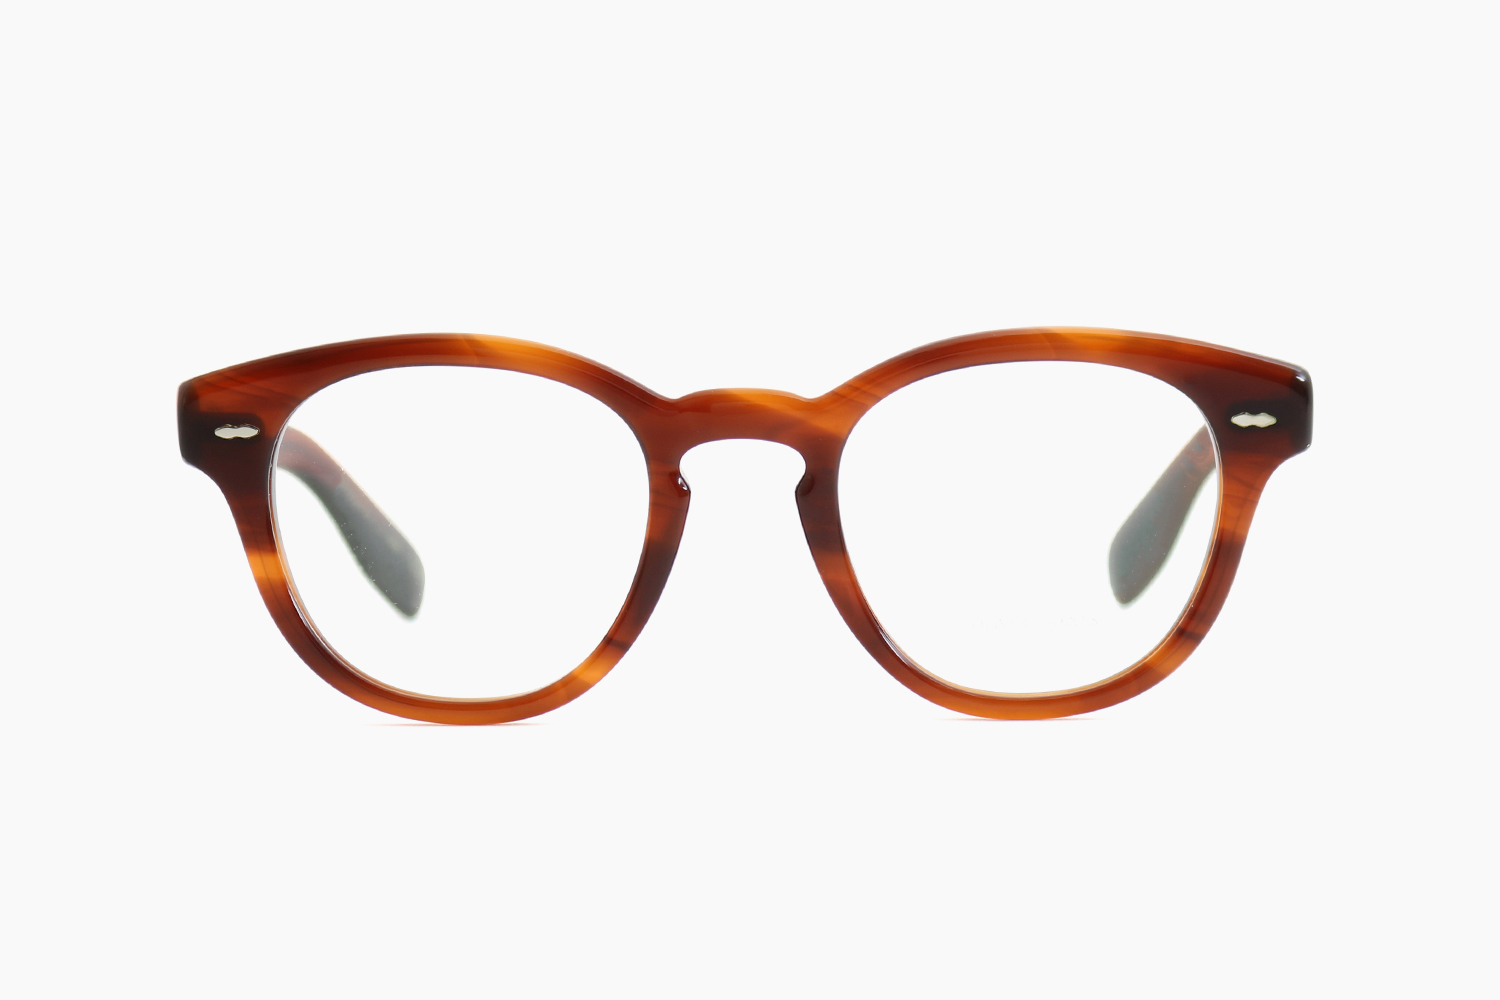 OLIVER PEOPLES｜CARY GRANT - GRANT TORTOISE（1679）｜PRODUCT